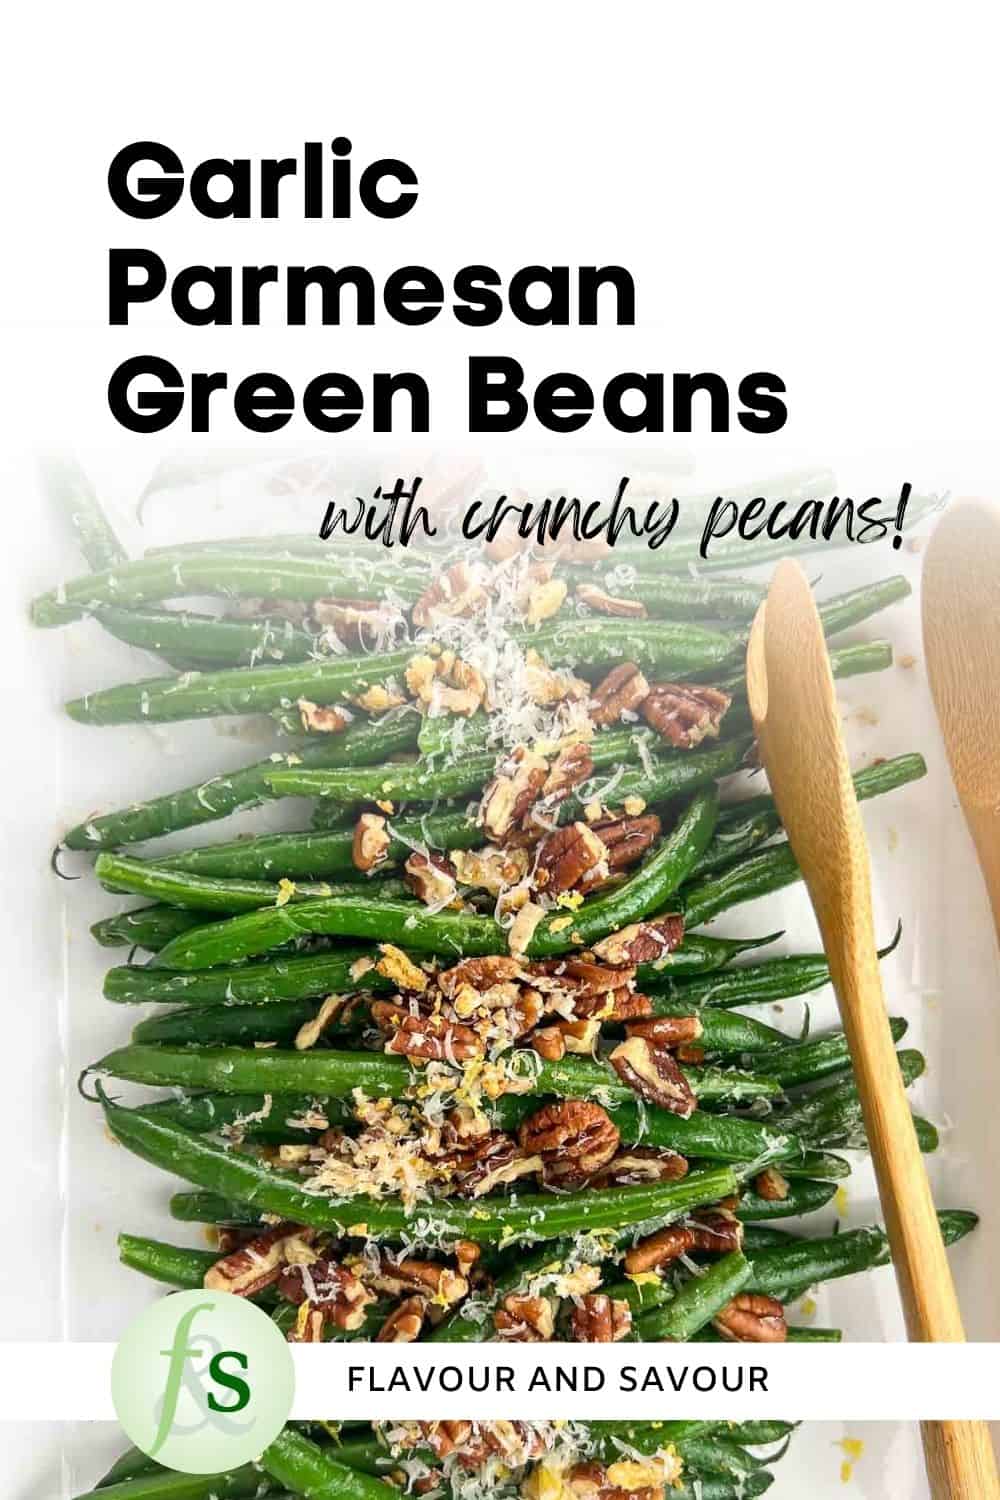 Image with text overlay for Sautéed Garlic Parmesan Green Beans with crunchy pecans.